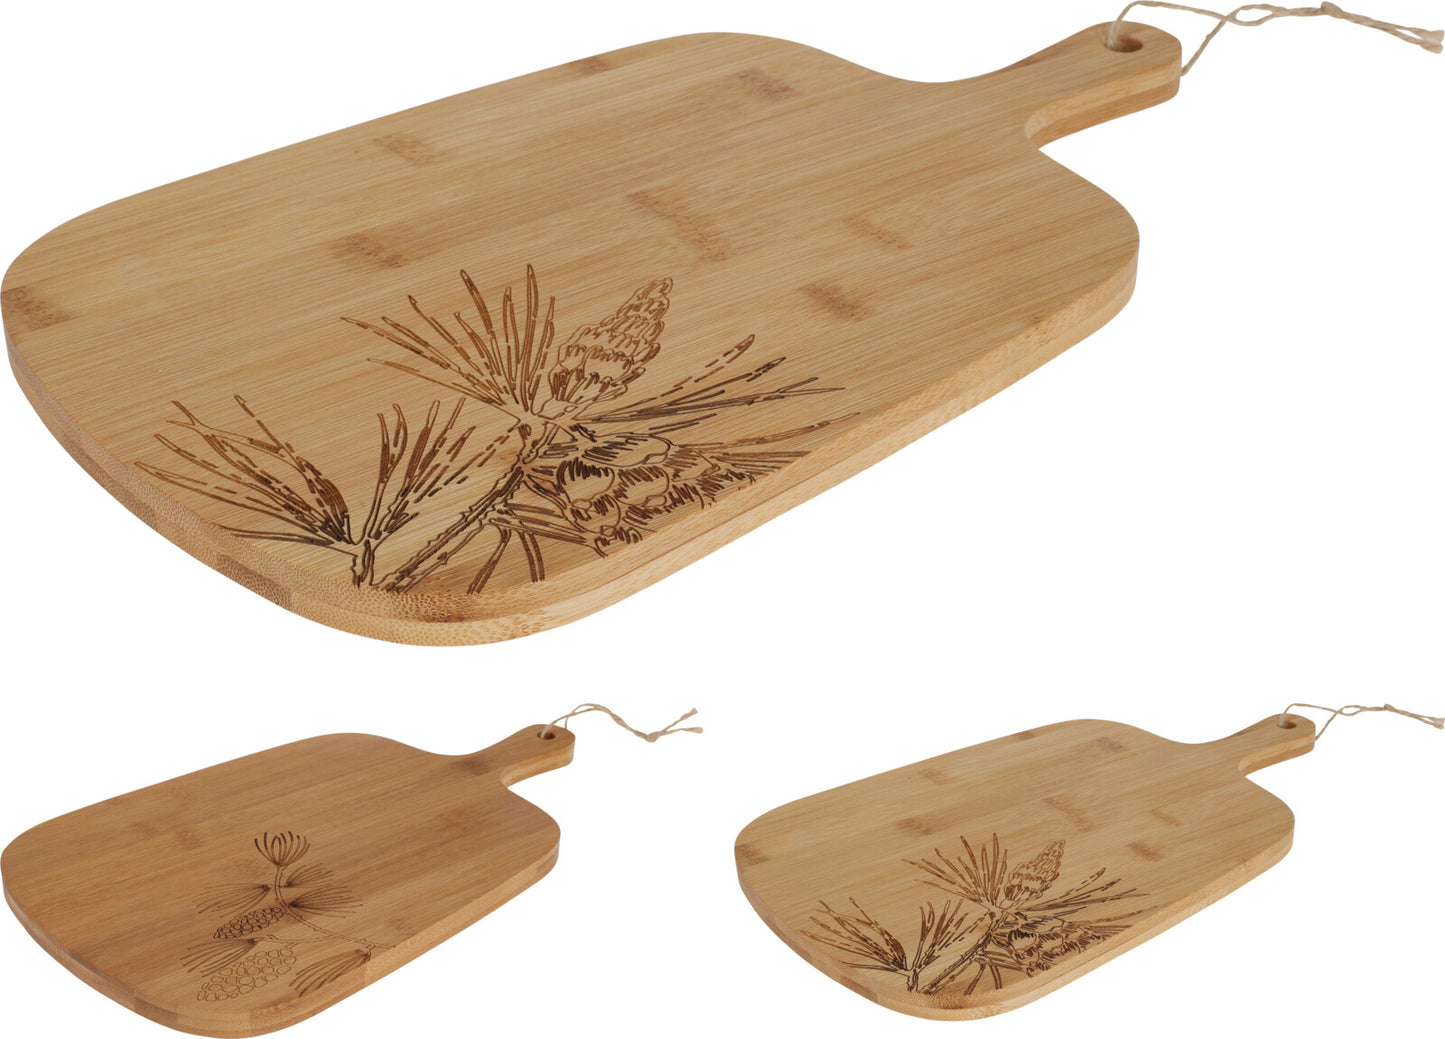 Bamboo Serving Tray with Handle and Etched Design